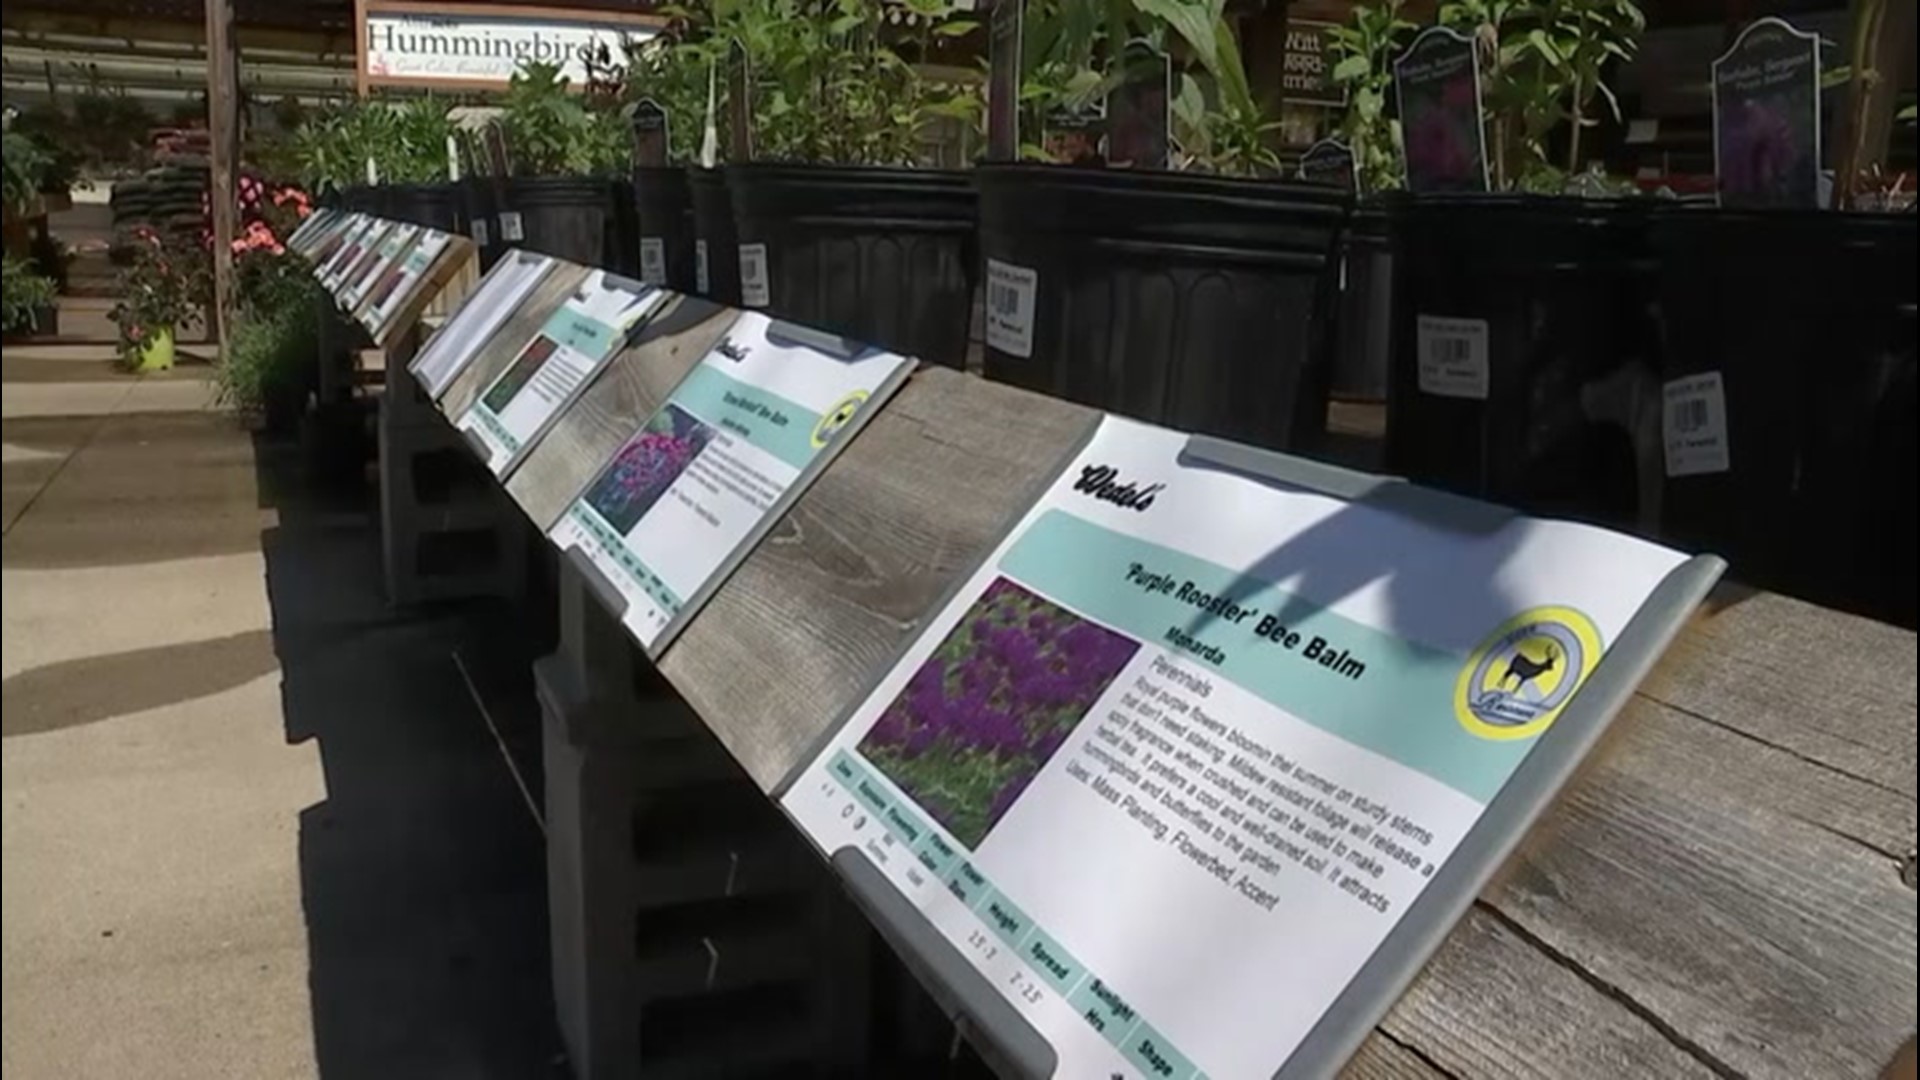 With spring here, nurseries and garden centers are swamped with people buying plants. AccuWeather's Blake Naftel spoke with a pro gardener for some handy tips.